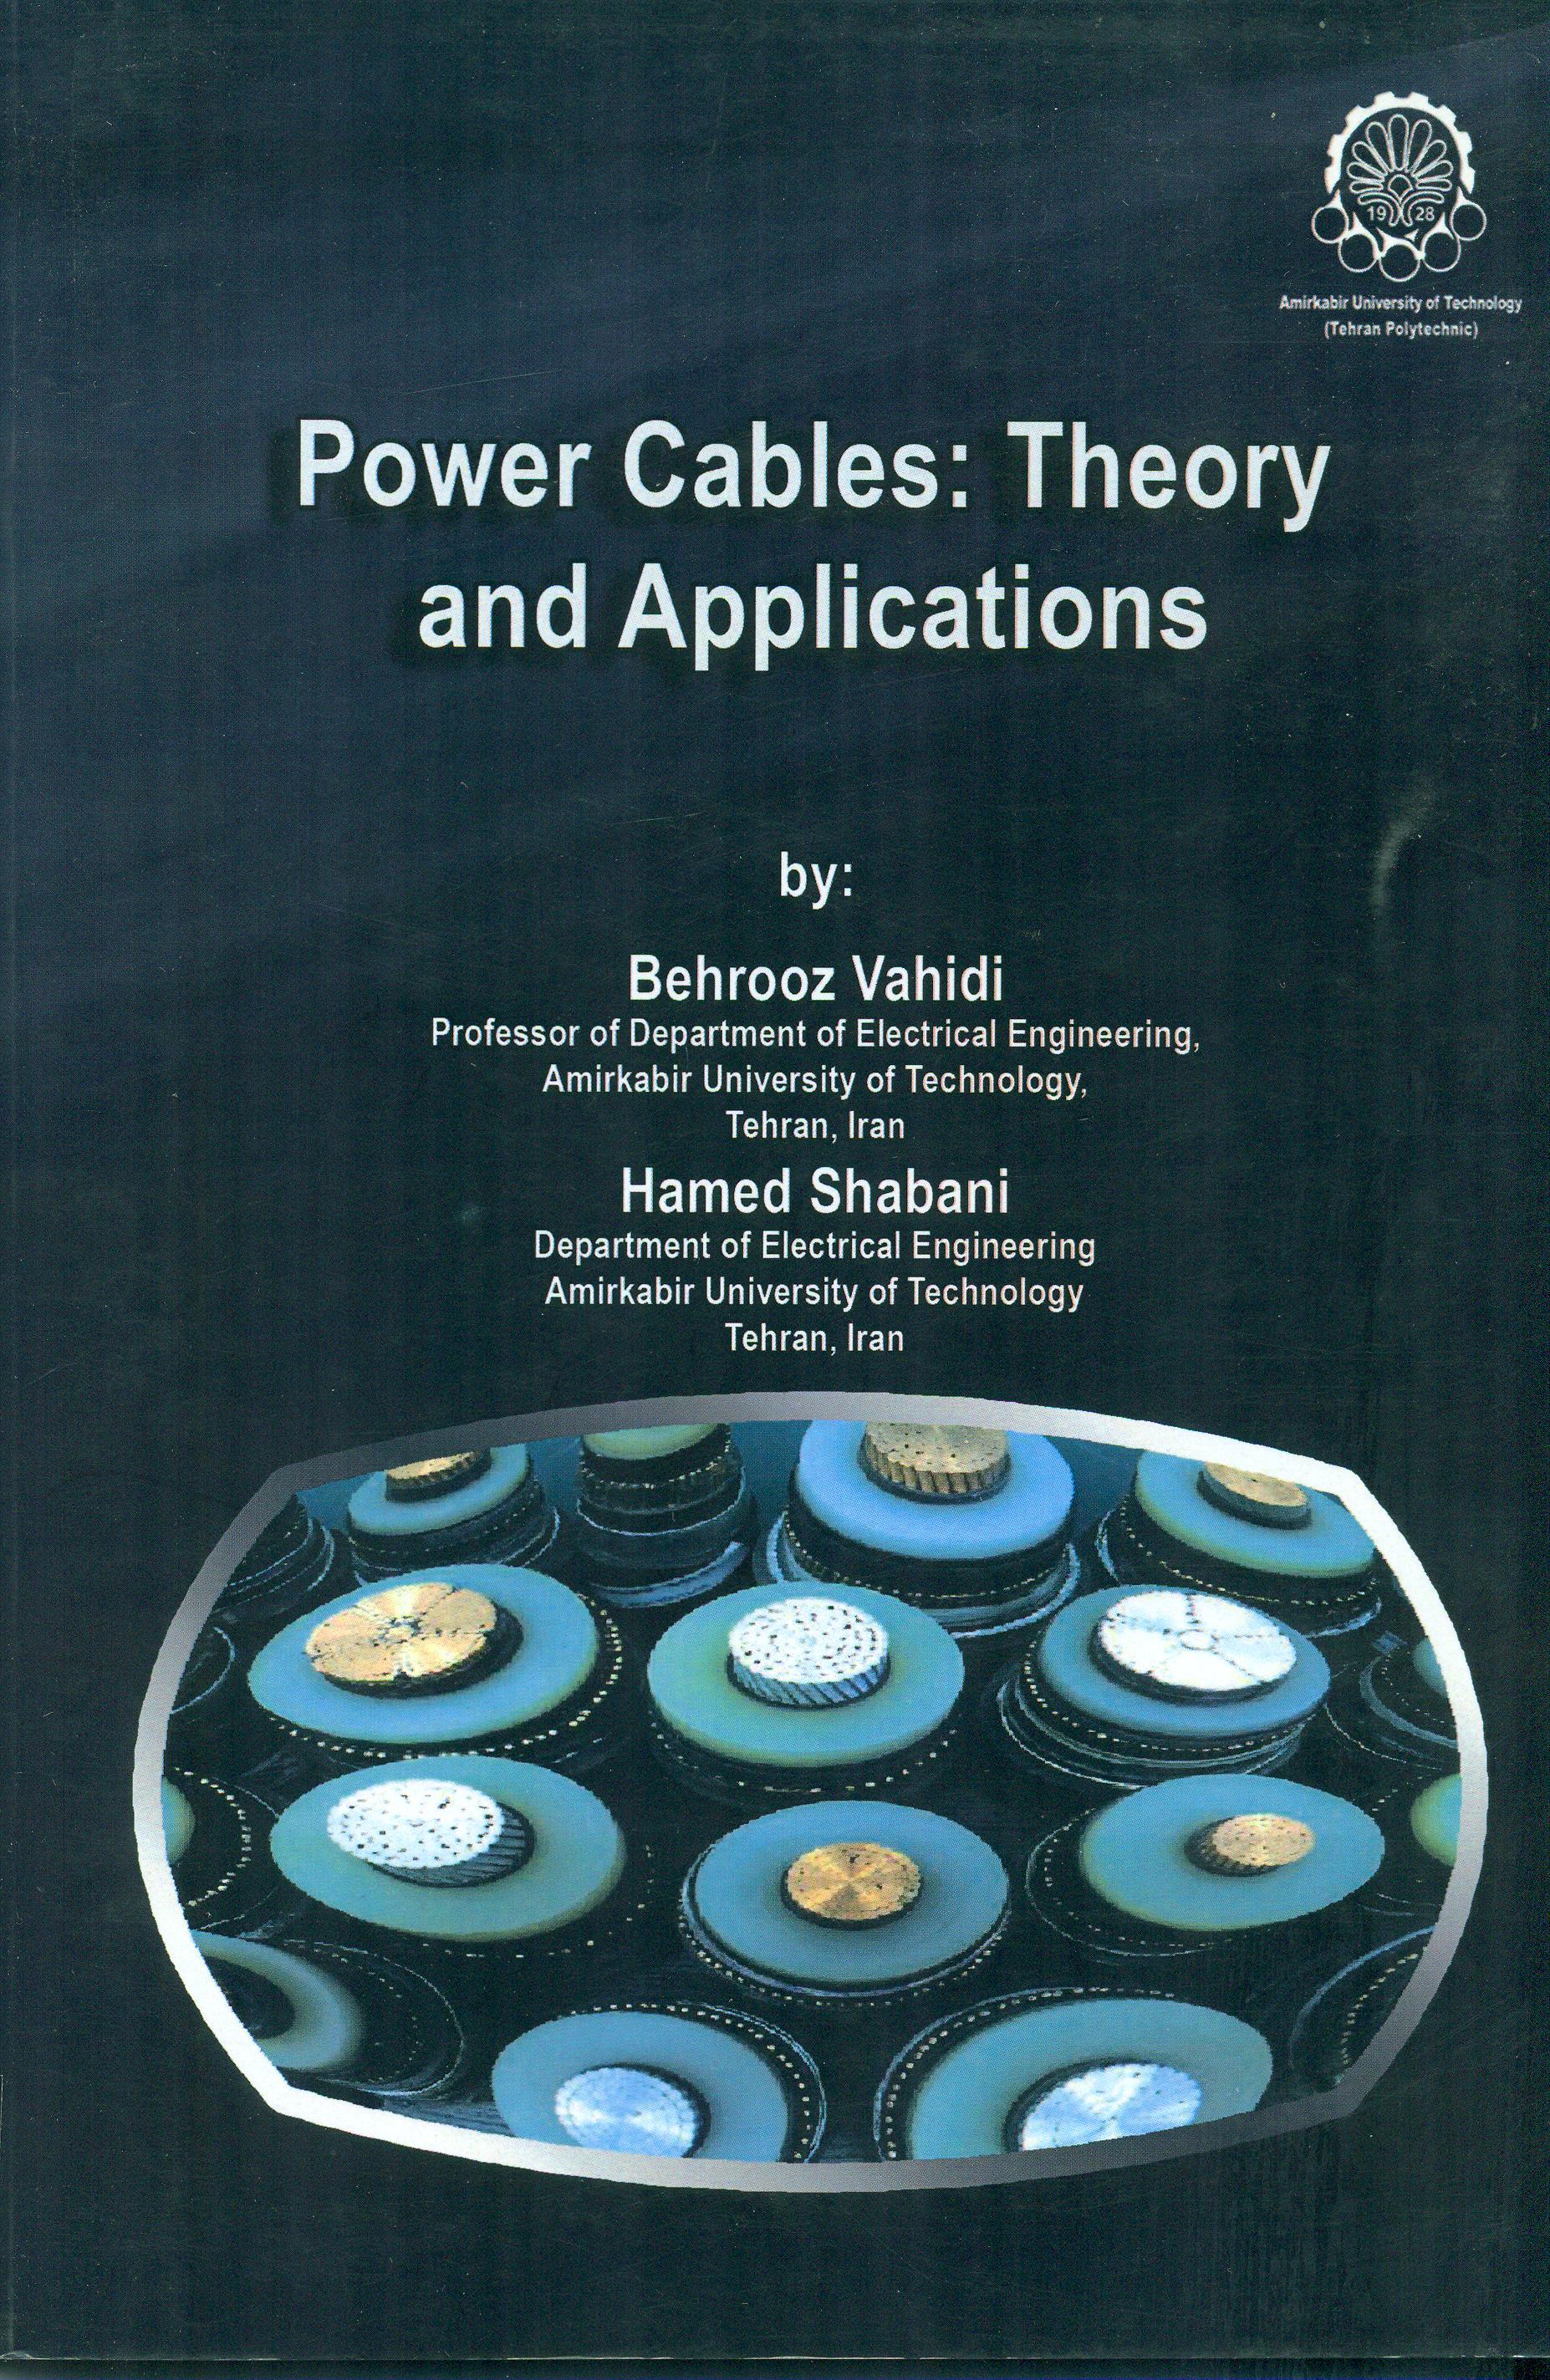 Power Cables:Theory and Applications